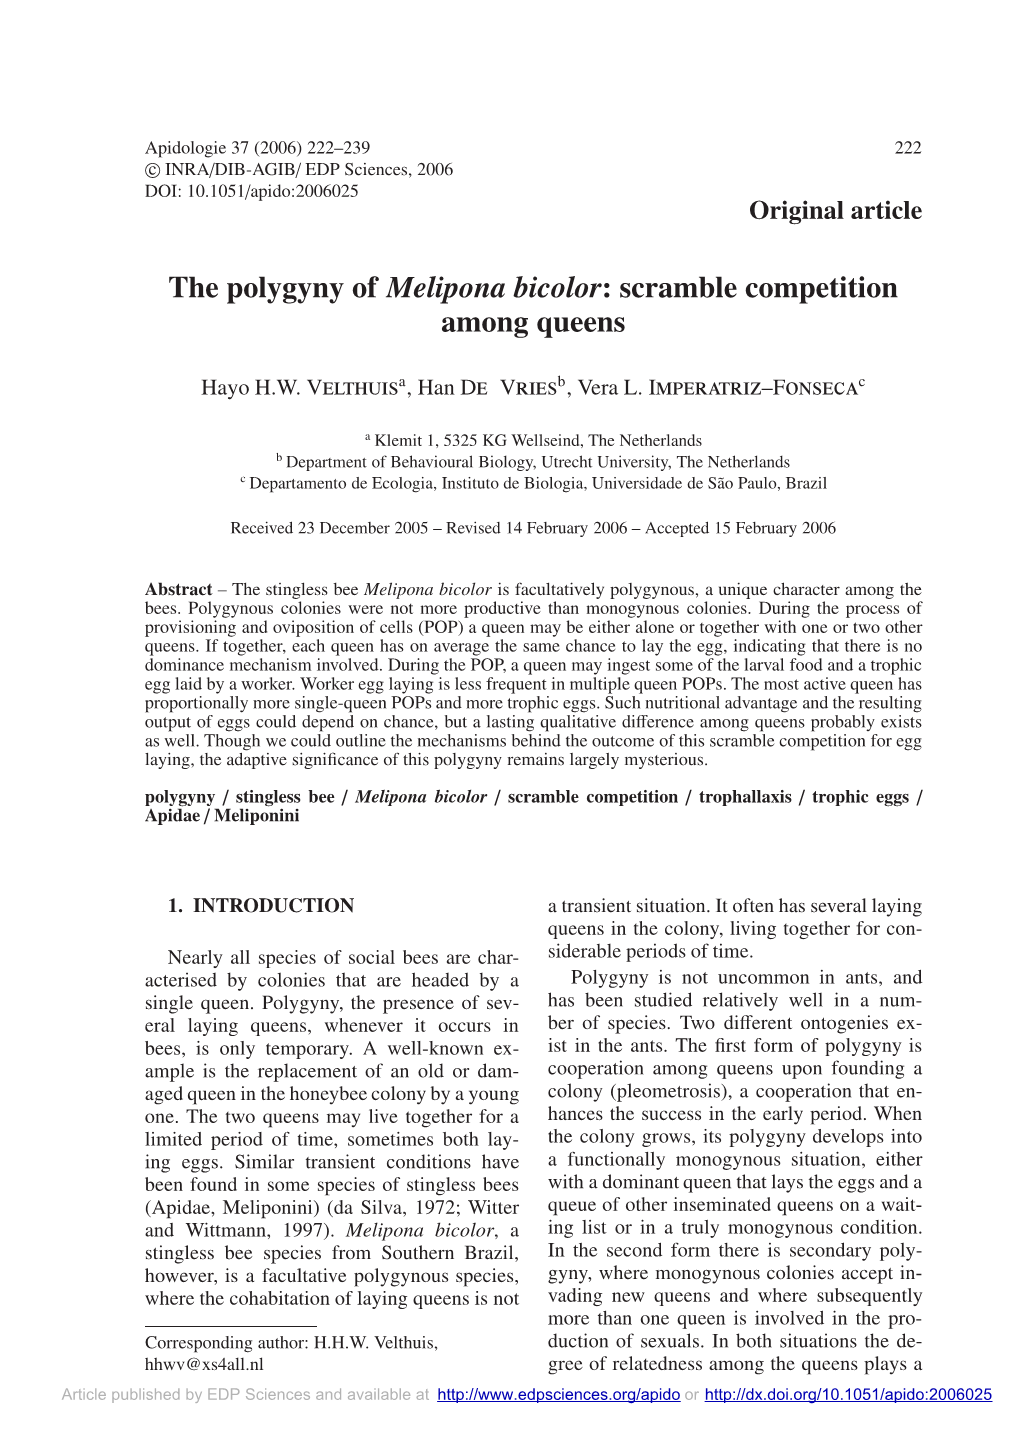 The Polygyny of Melipona Bicolor: Scramble Competition Among Queens